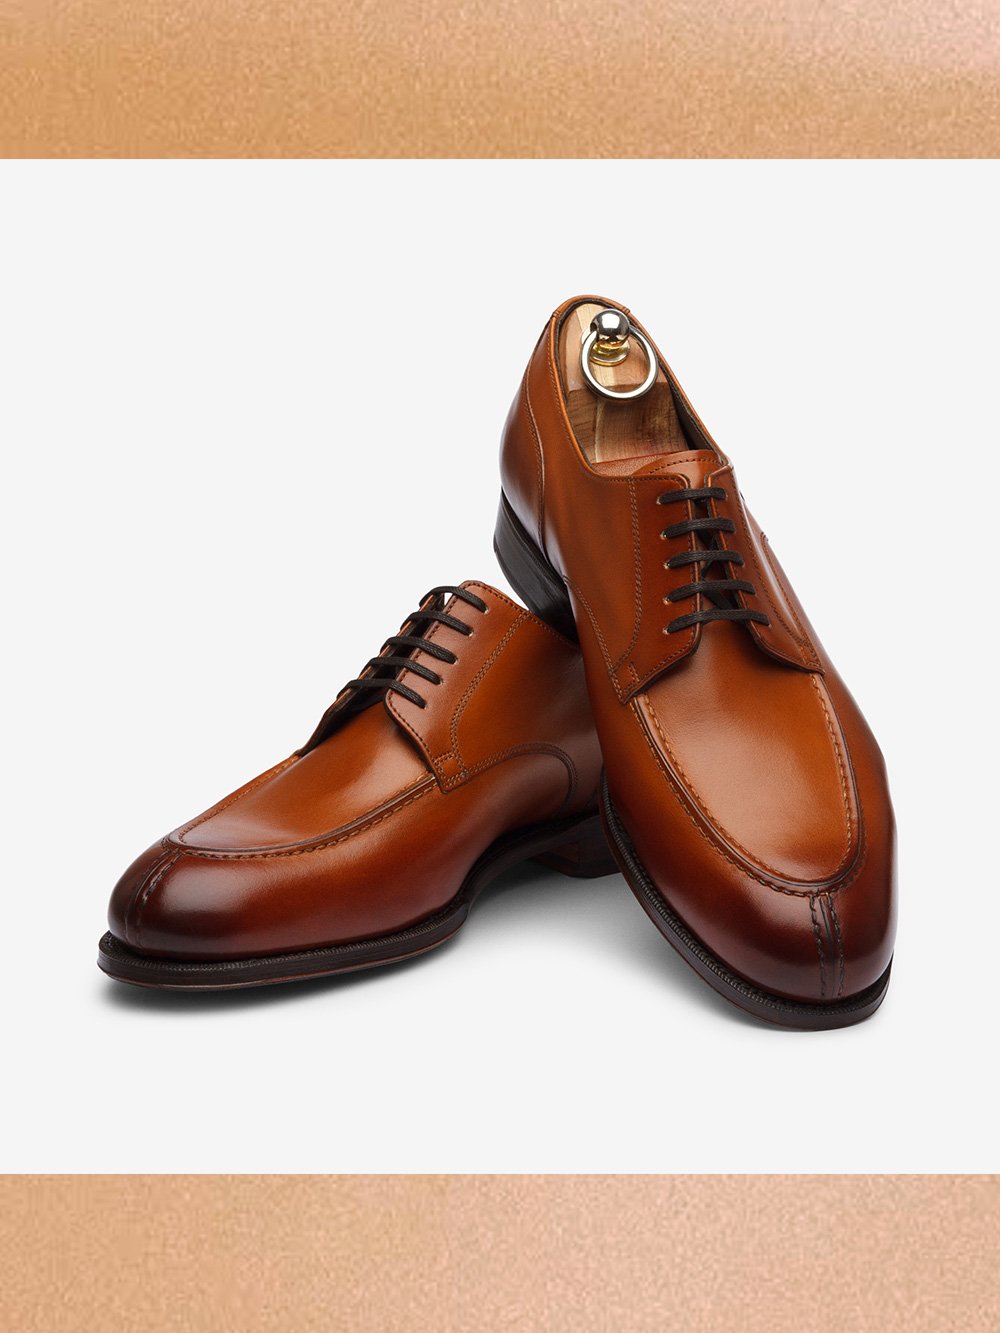 Bridlen Shoes Review: Founder's Line & Goodyear Welted Range